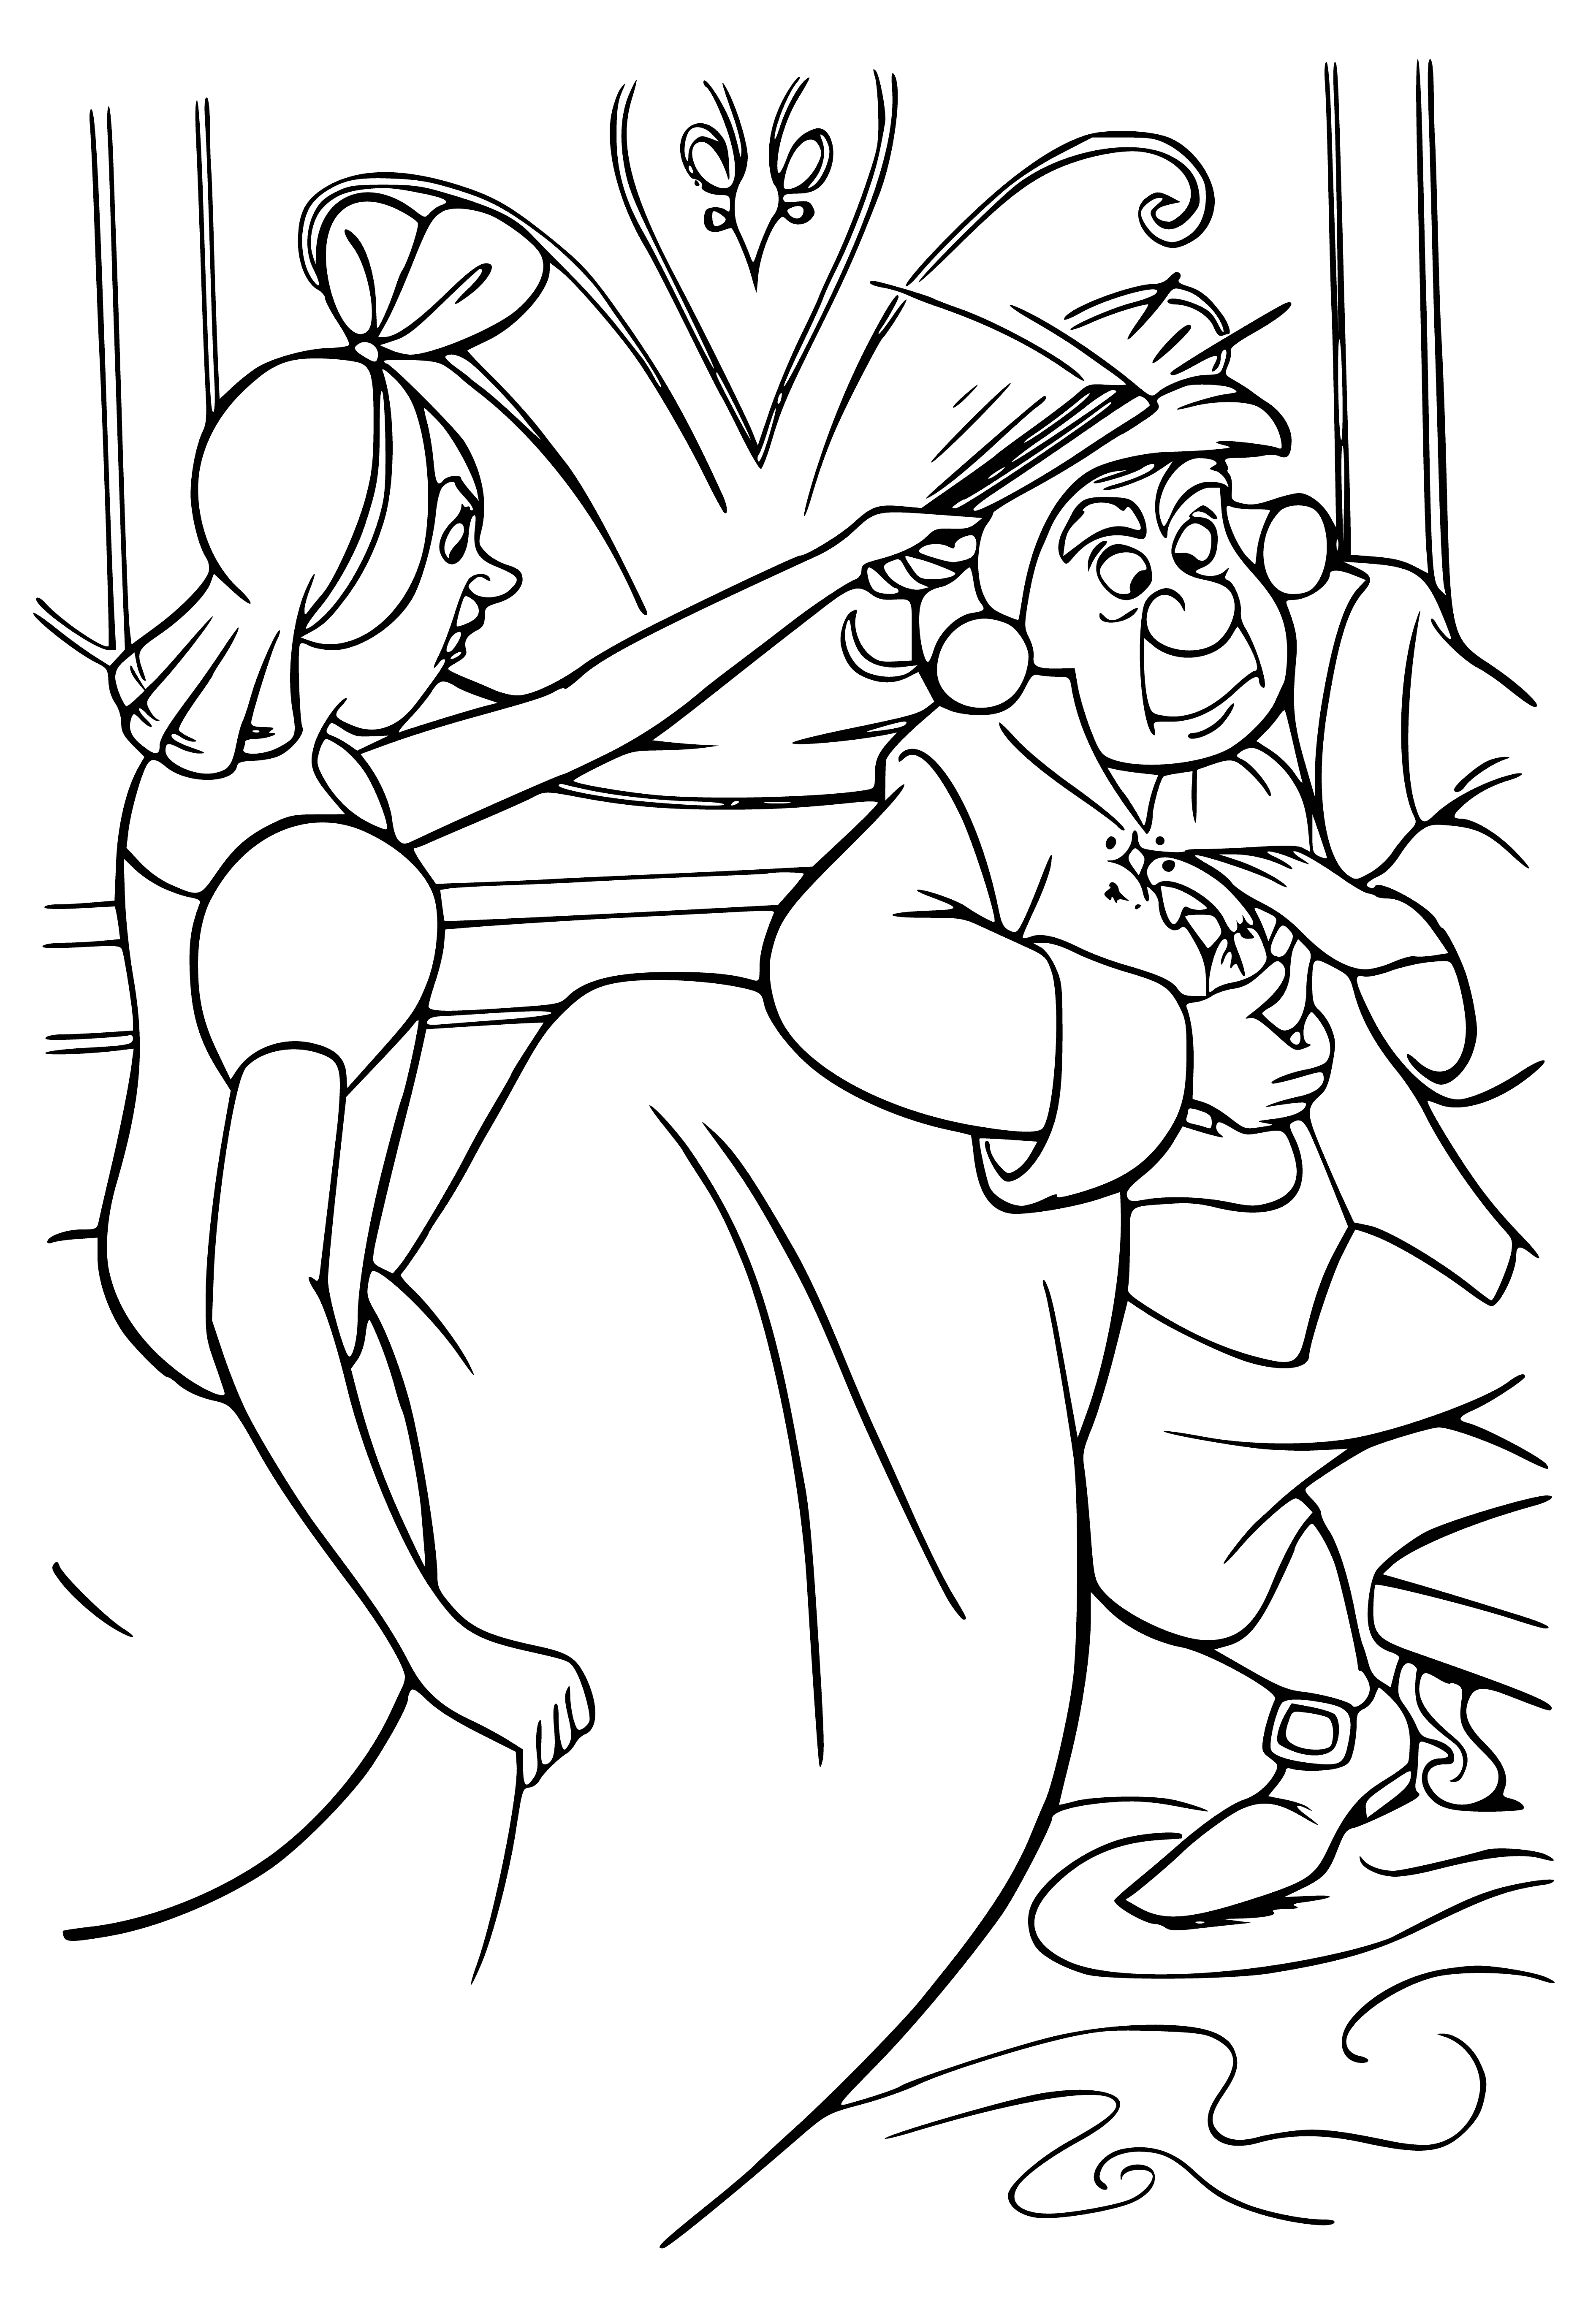 coloring page: Cinderella came and fit it perfectly, thus it held the title of her story for generations to come. 

Once upon a time there was a tiny glass slipper that fit a small foot-- Cinderella! Generations tell her tale of the perfect fit.